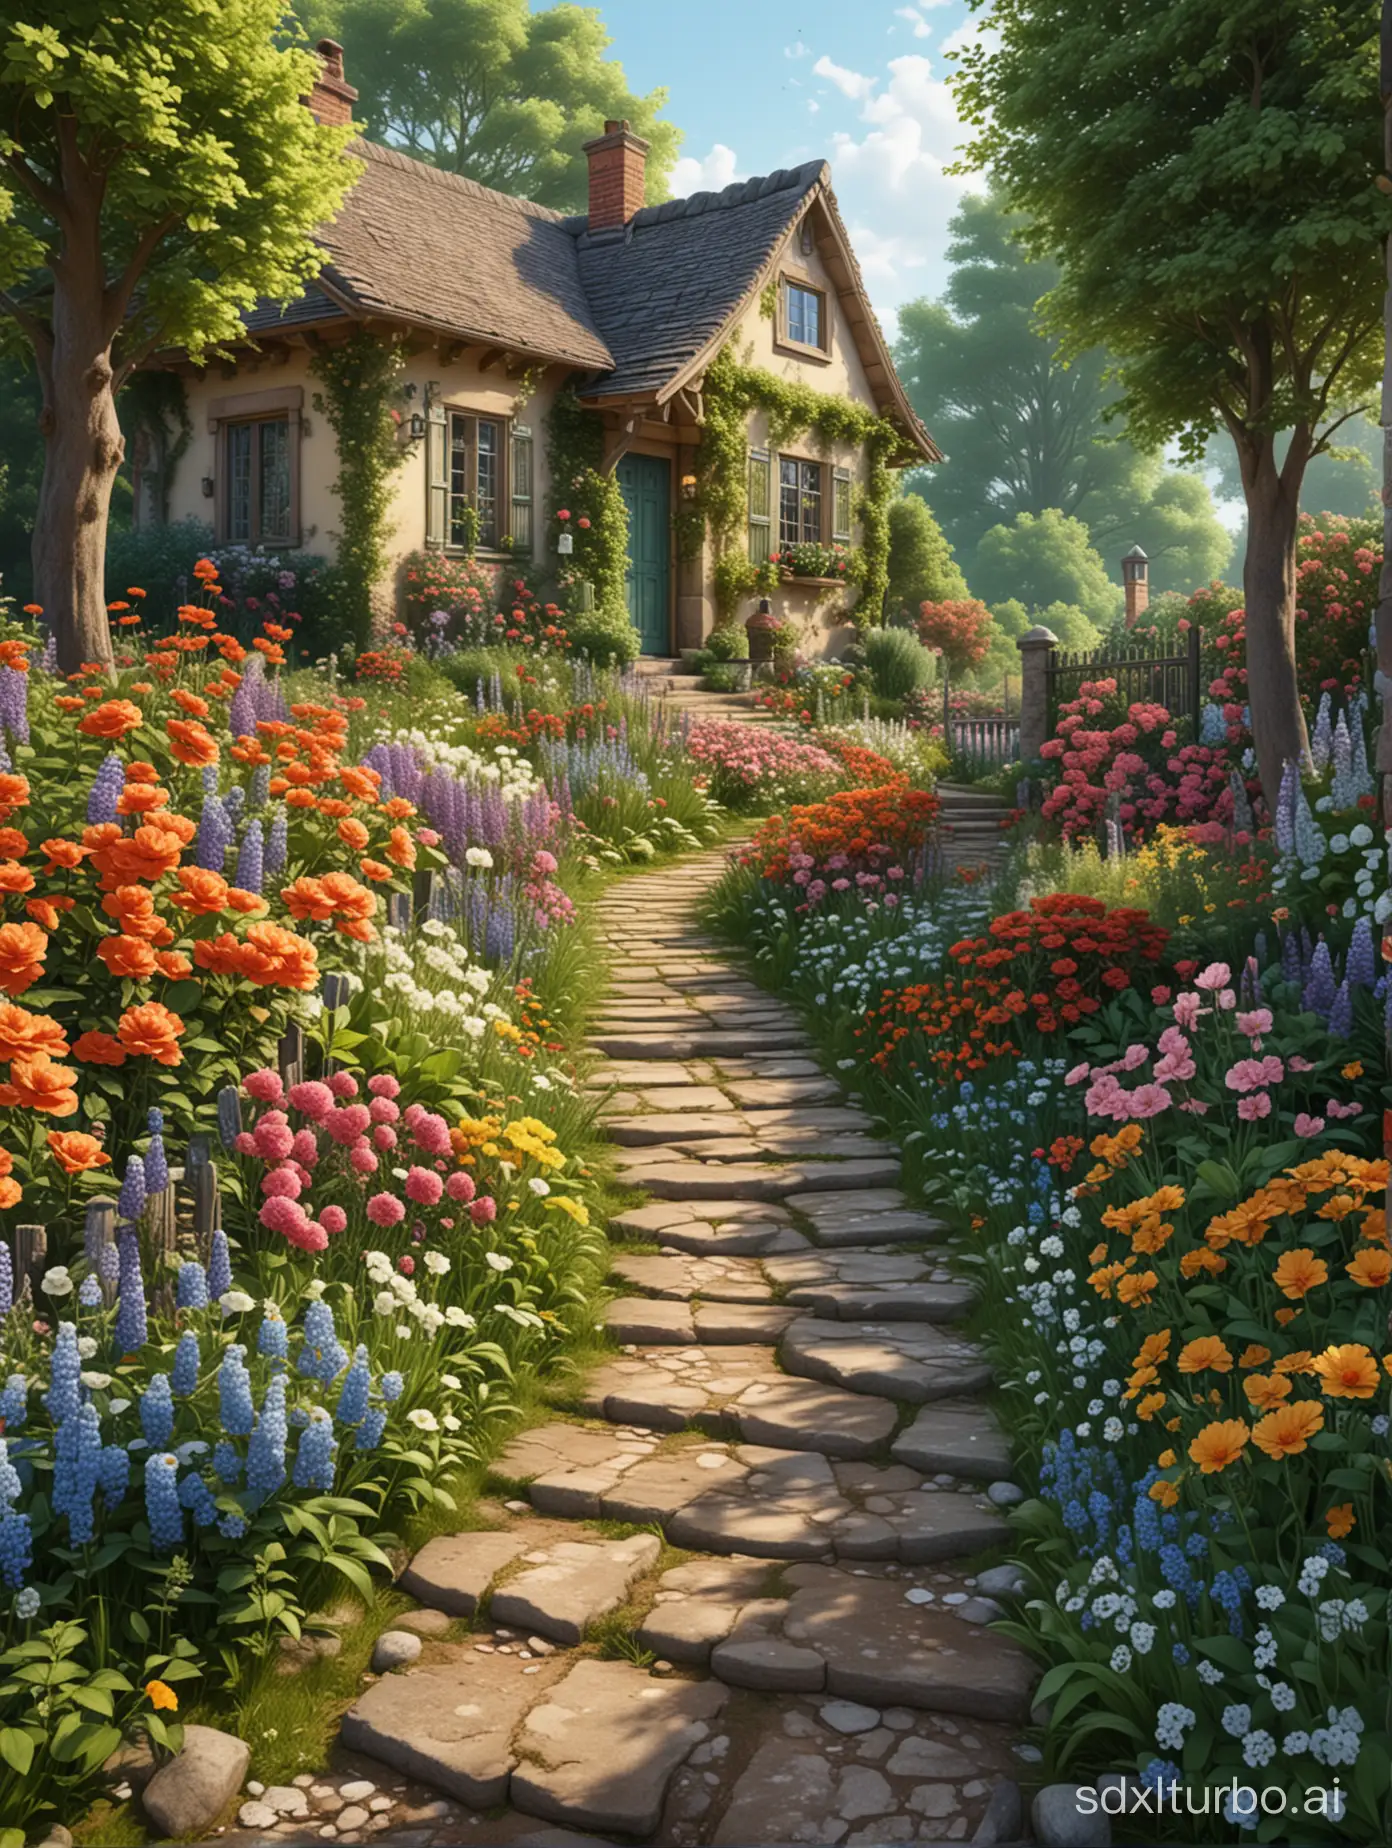 (Photorealsitic)、 A detailed botanical garden:1.5，Best Quality, masterpiecel1.4), (Realistic, Photorealsitic:1.37)Photo of a garden house with flowers and paths, rich picturesque colors, Flower Cottage, Full of color and rich details, beautiful house on a forest path, idyllic cottage, beautiful art uhd 4 k, blossoming path to heaven, scenery art detailed, a beautiful artwork illustration, landscape artwork, detailed painting 4 k